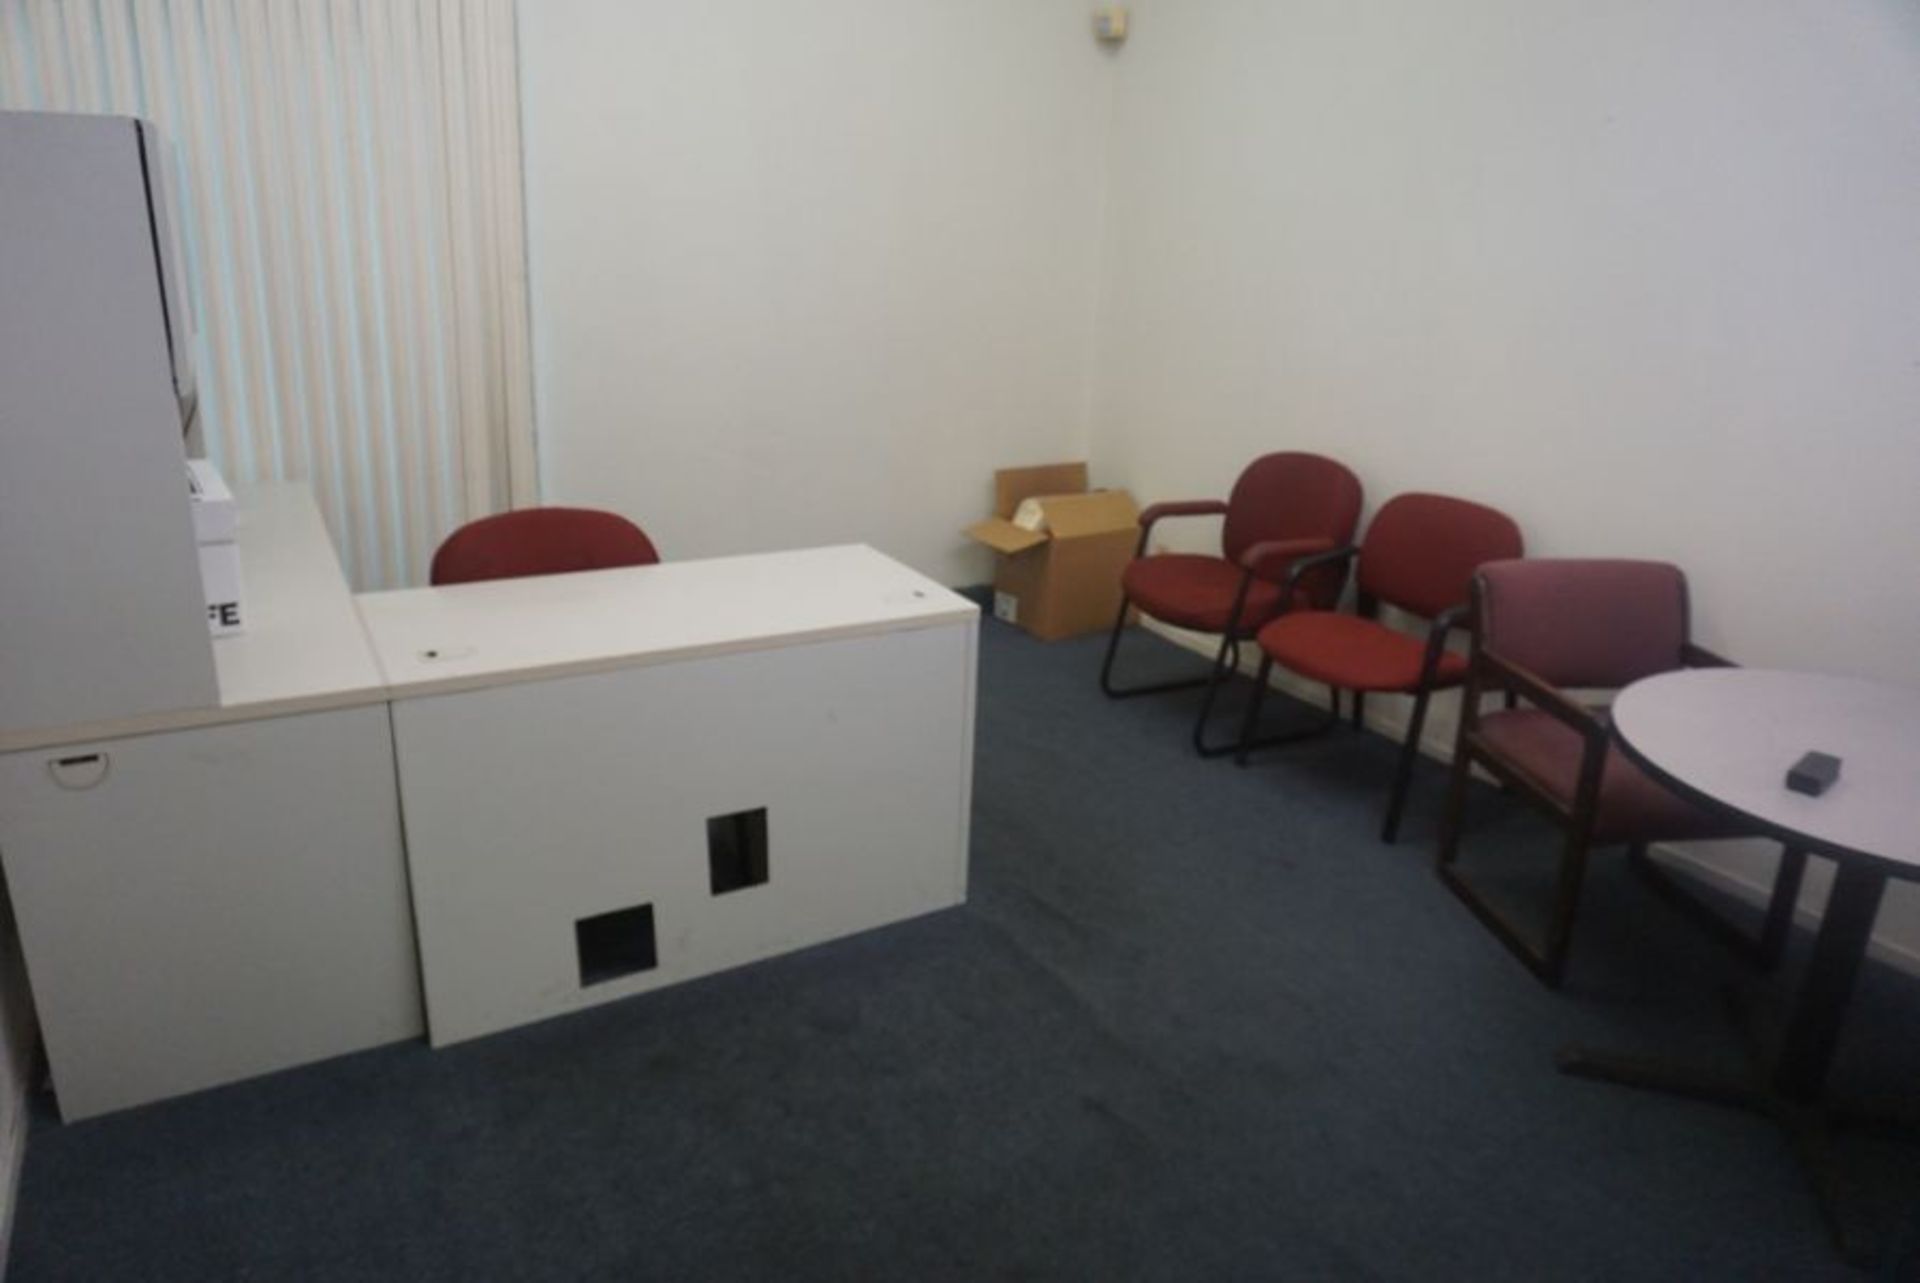 Desk and Chairs - Image 2 of 3